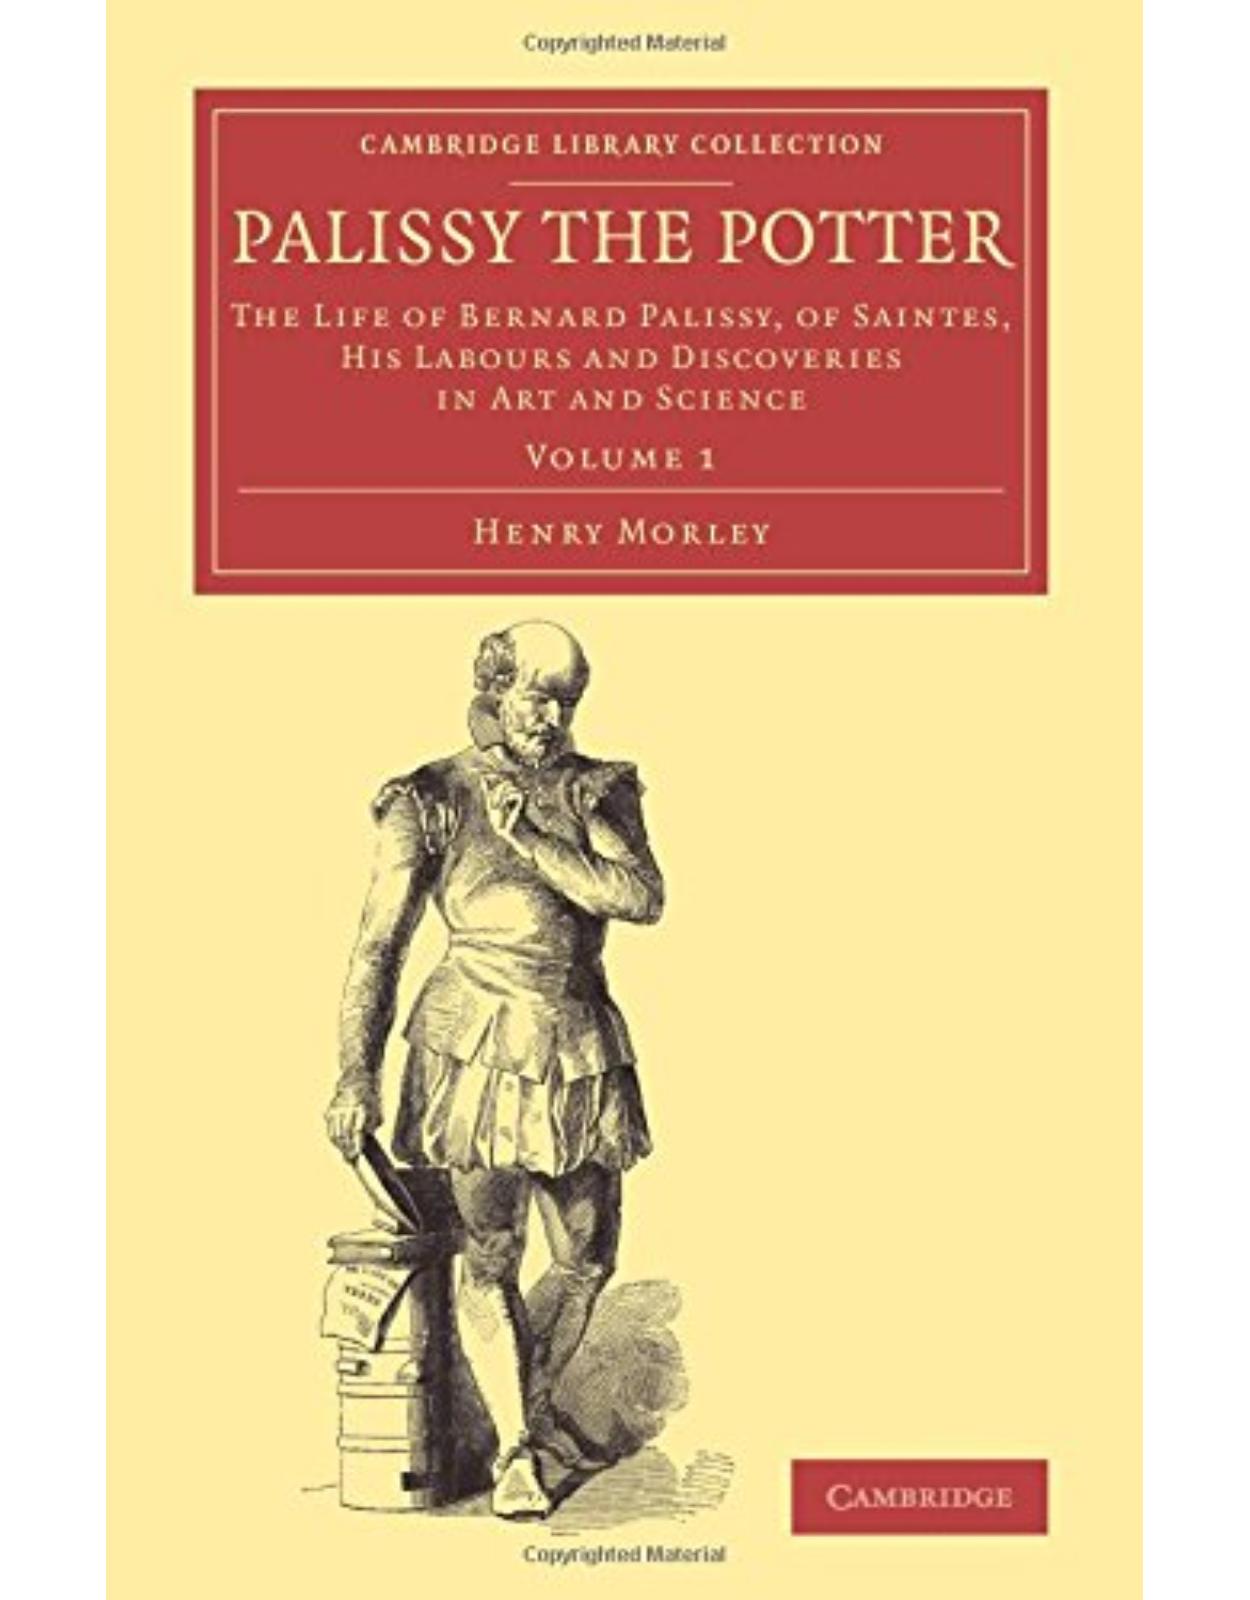 Palissy the Potter 2 Volume Set: The Life of Bernard Palissy, of Saintes, his Labours and Discoveries in Art and Science